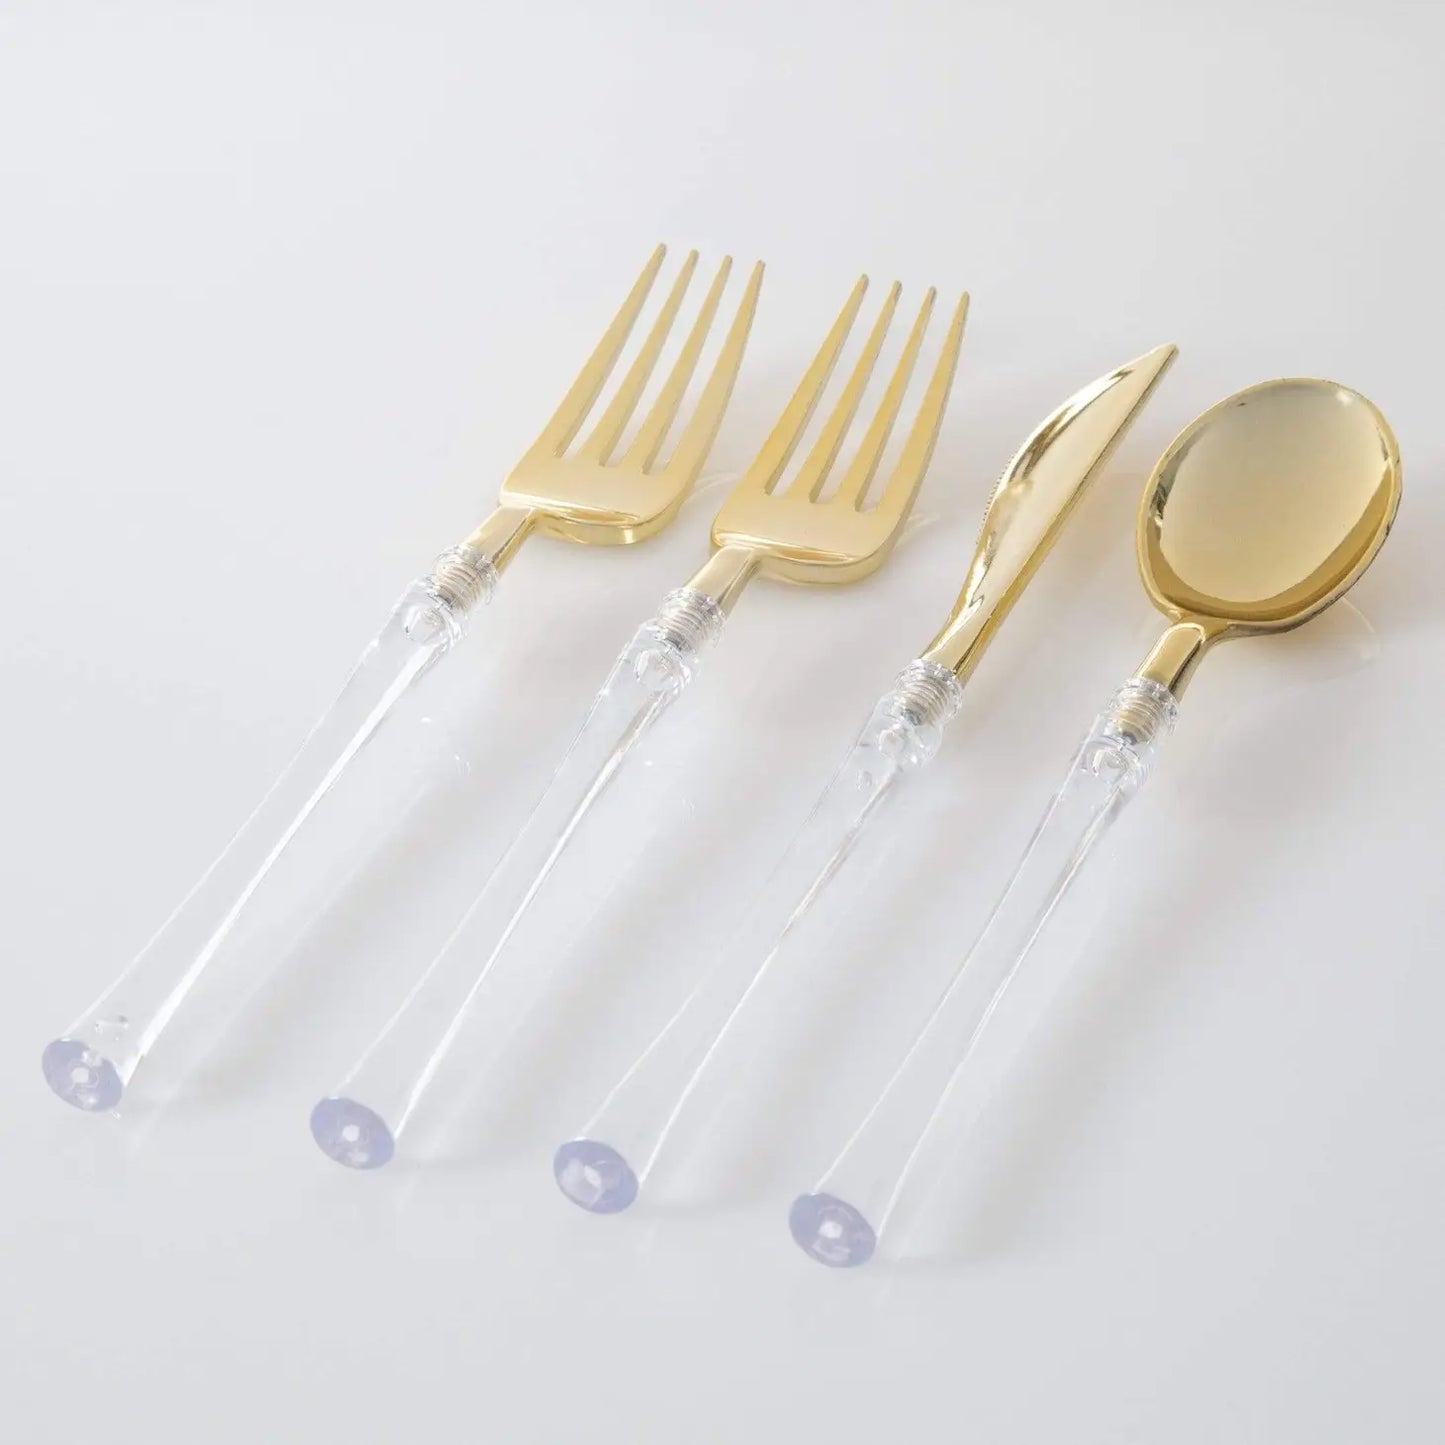 NEO CLEAR + GOLD CUTLERY SET | 32 PIECES